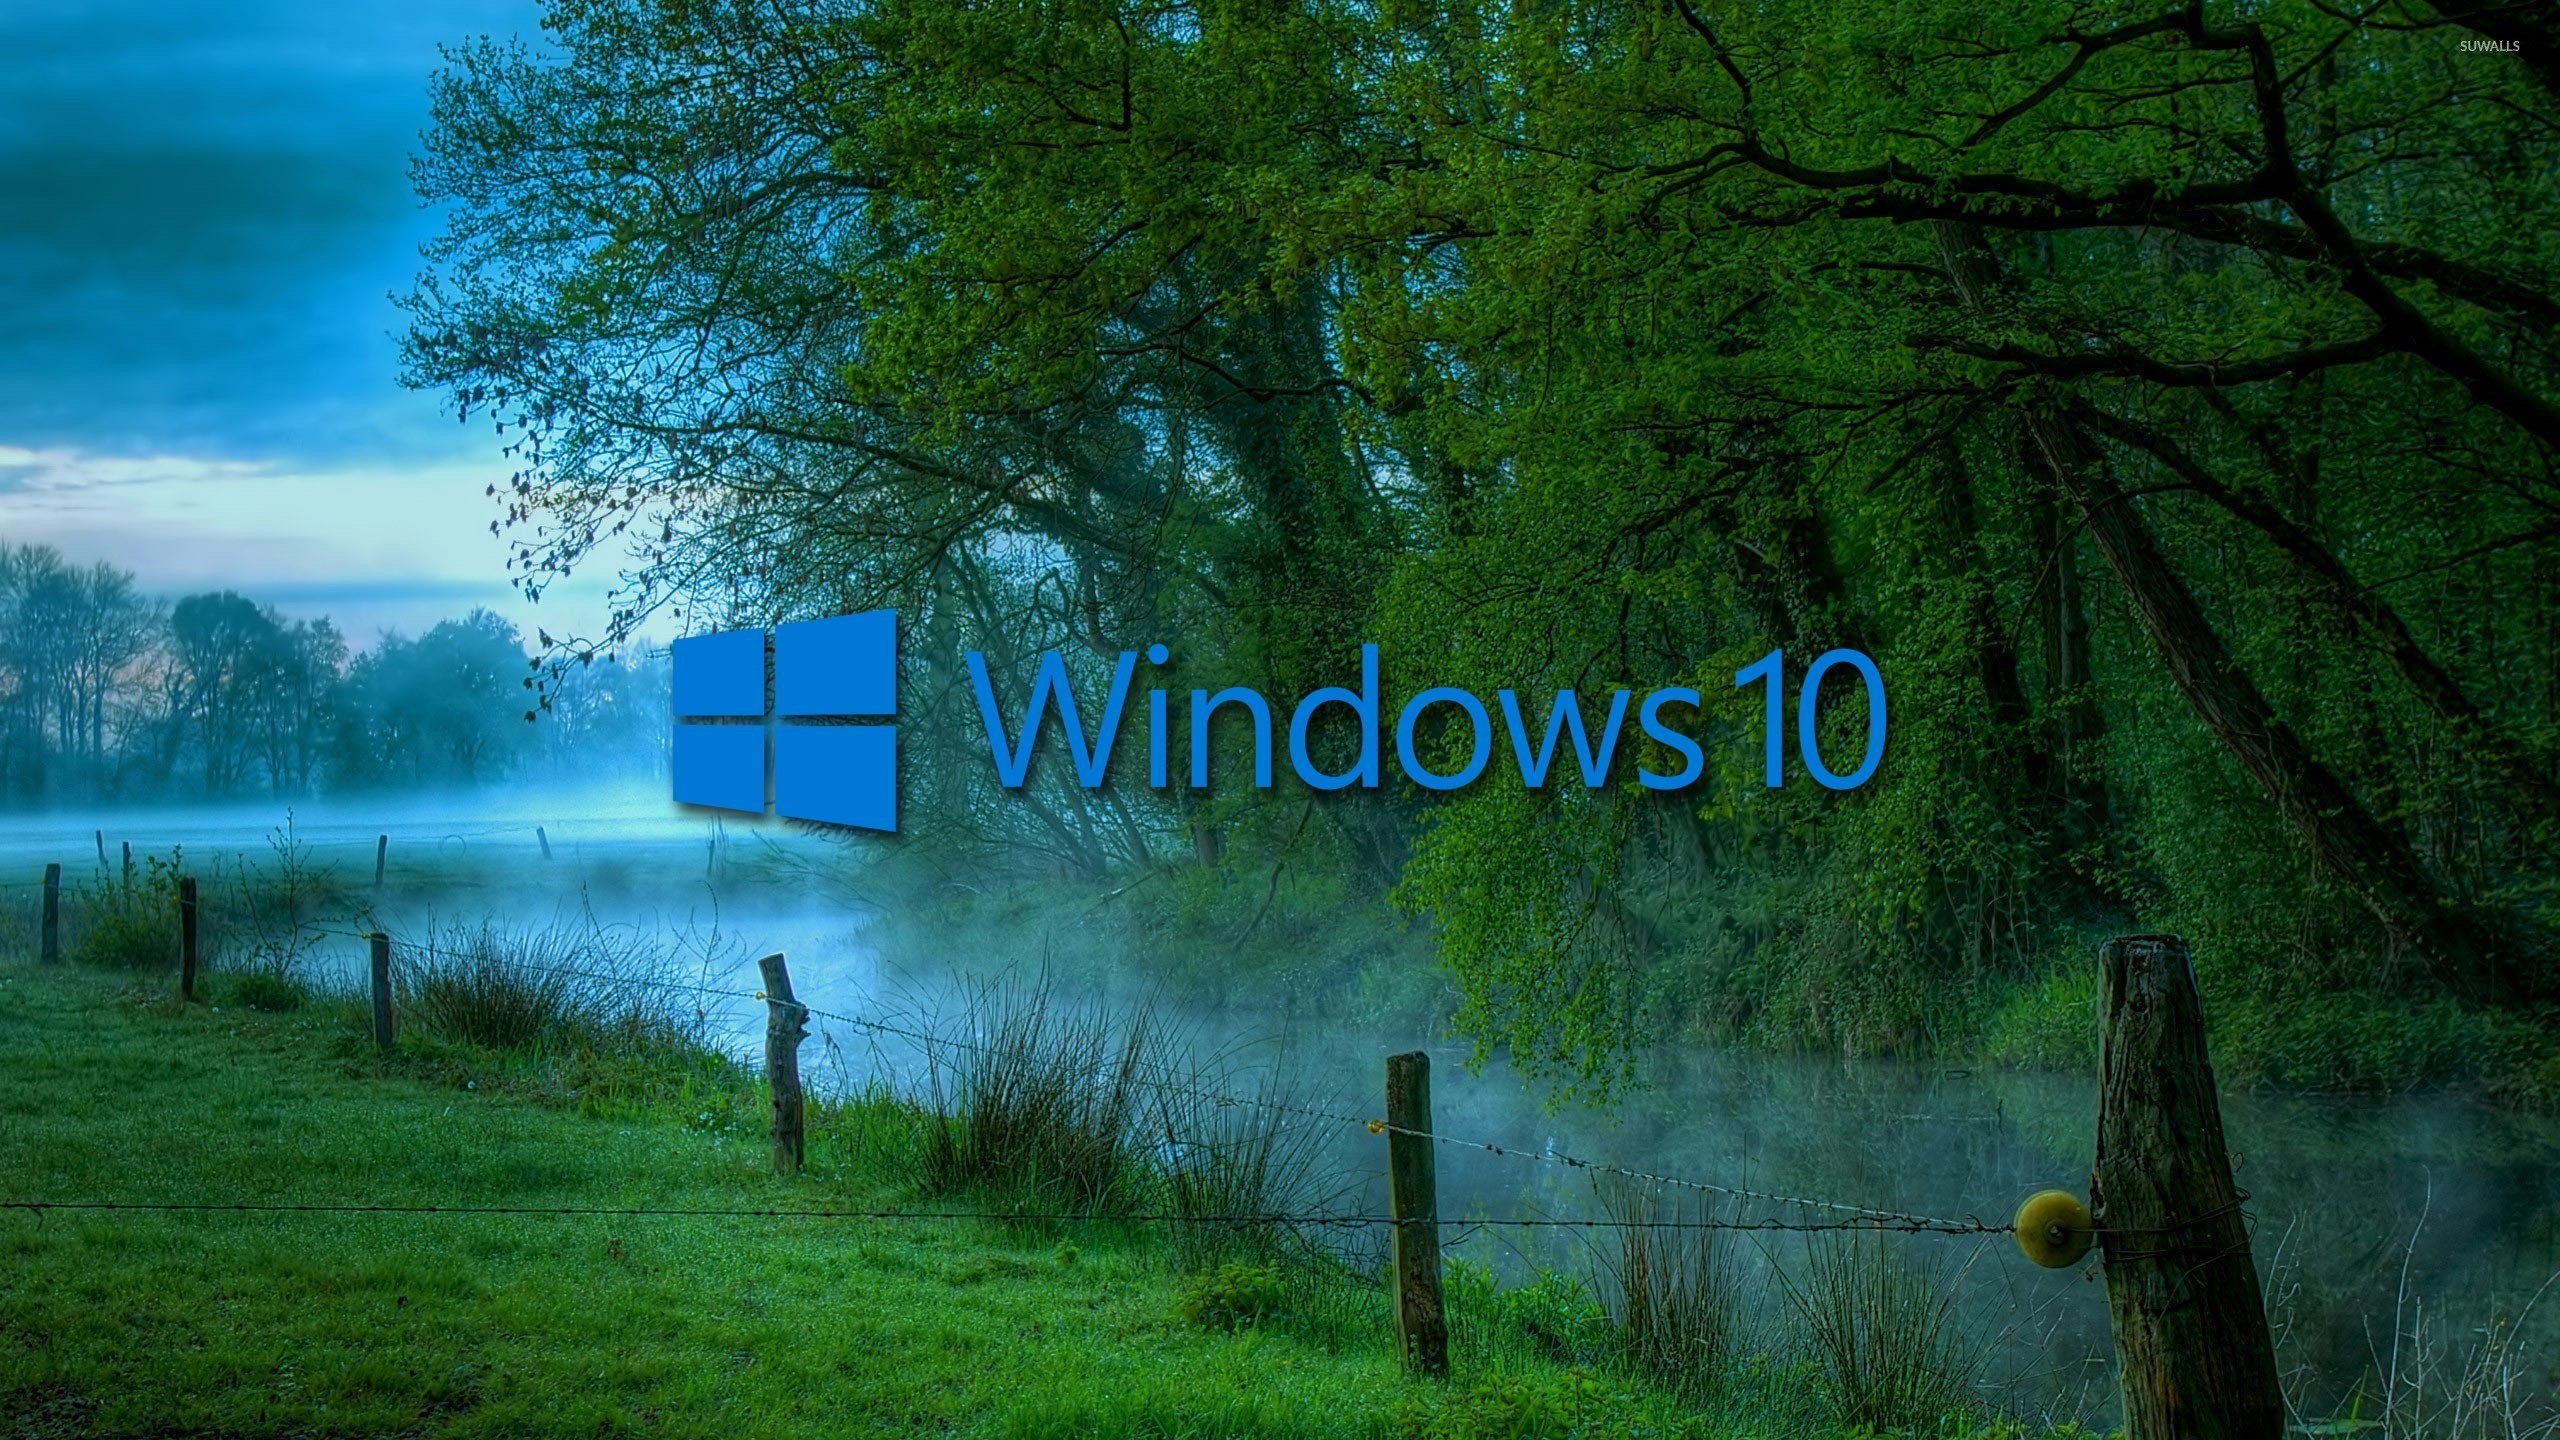 2560x1440 Windows 10 in the misty morning blue text logo wallpaper - Computer .